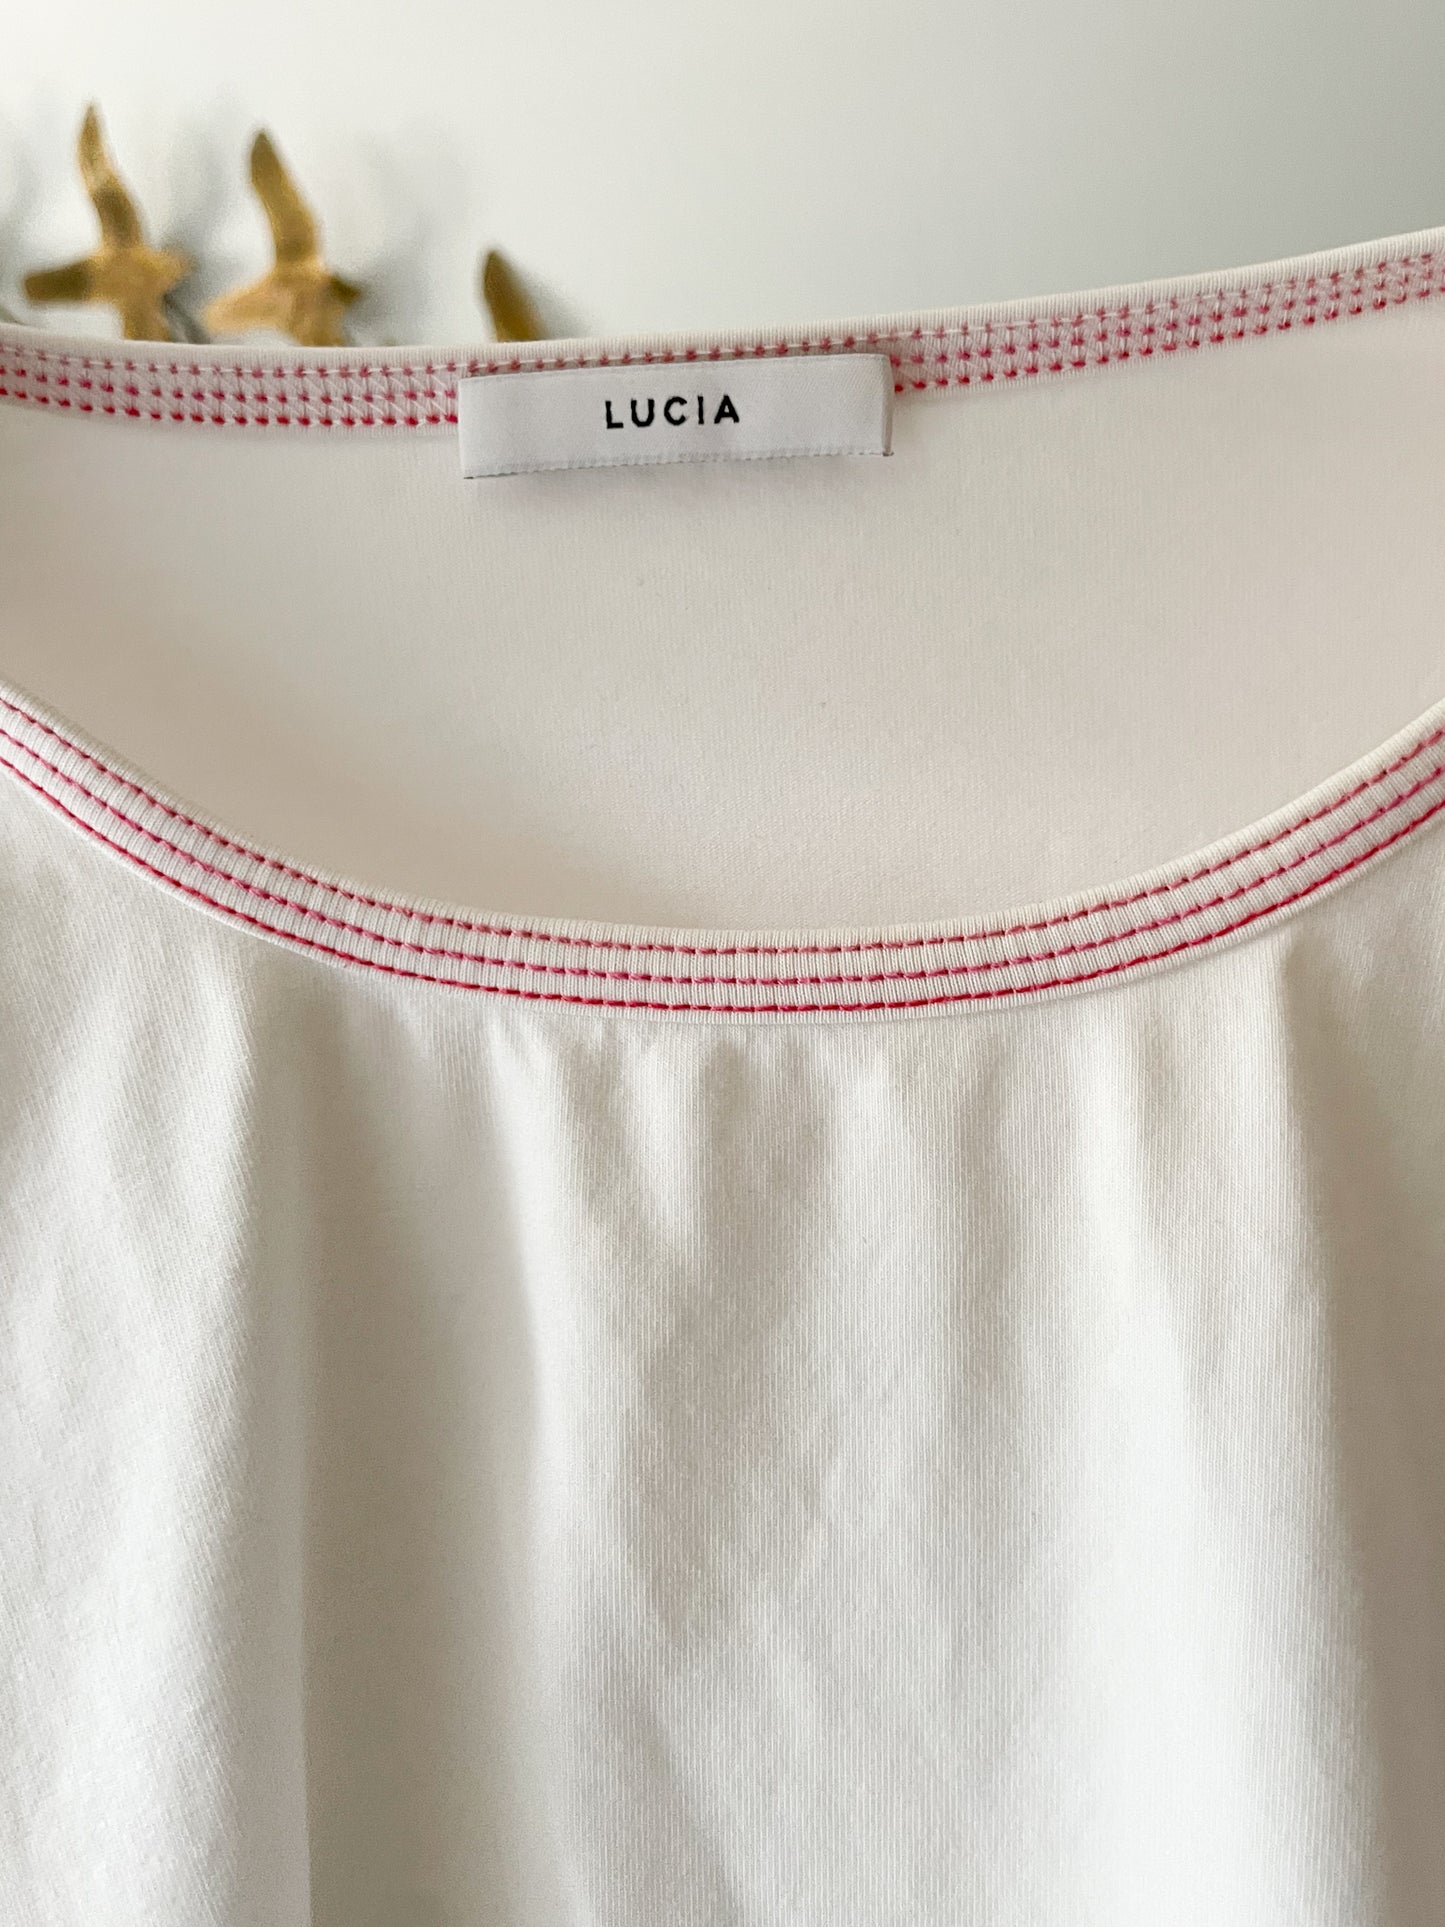 Lucia White Cotton Stretch Pink Stitched T-Shirt - Size 14